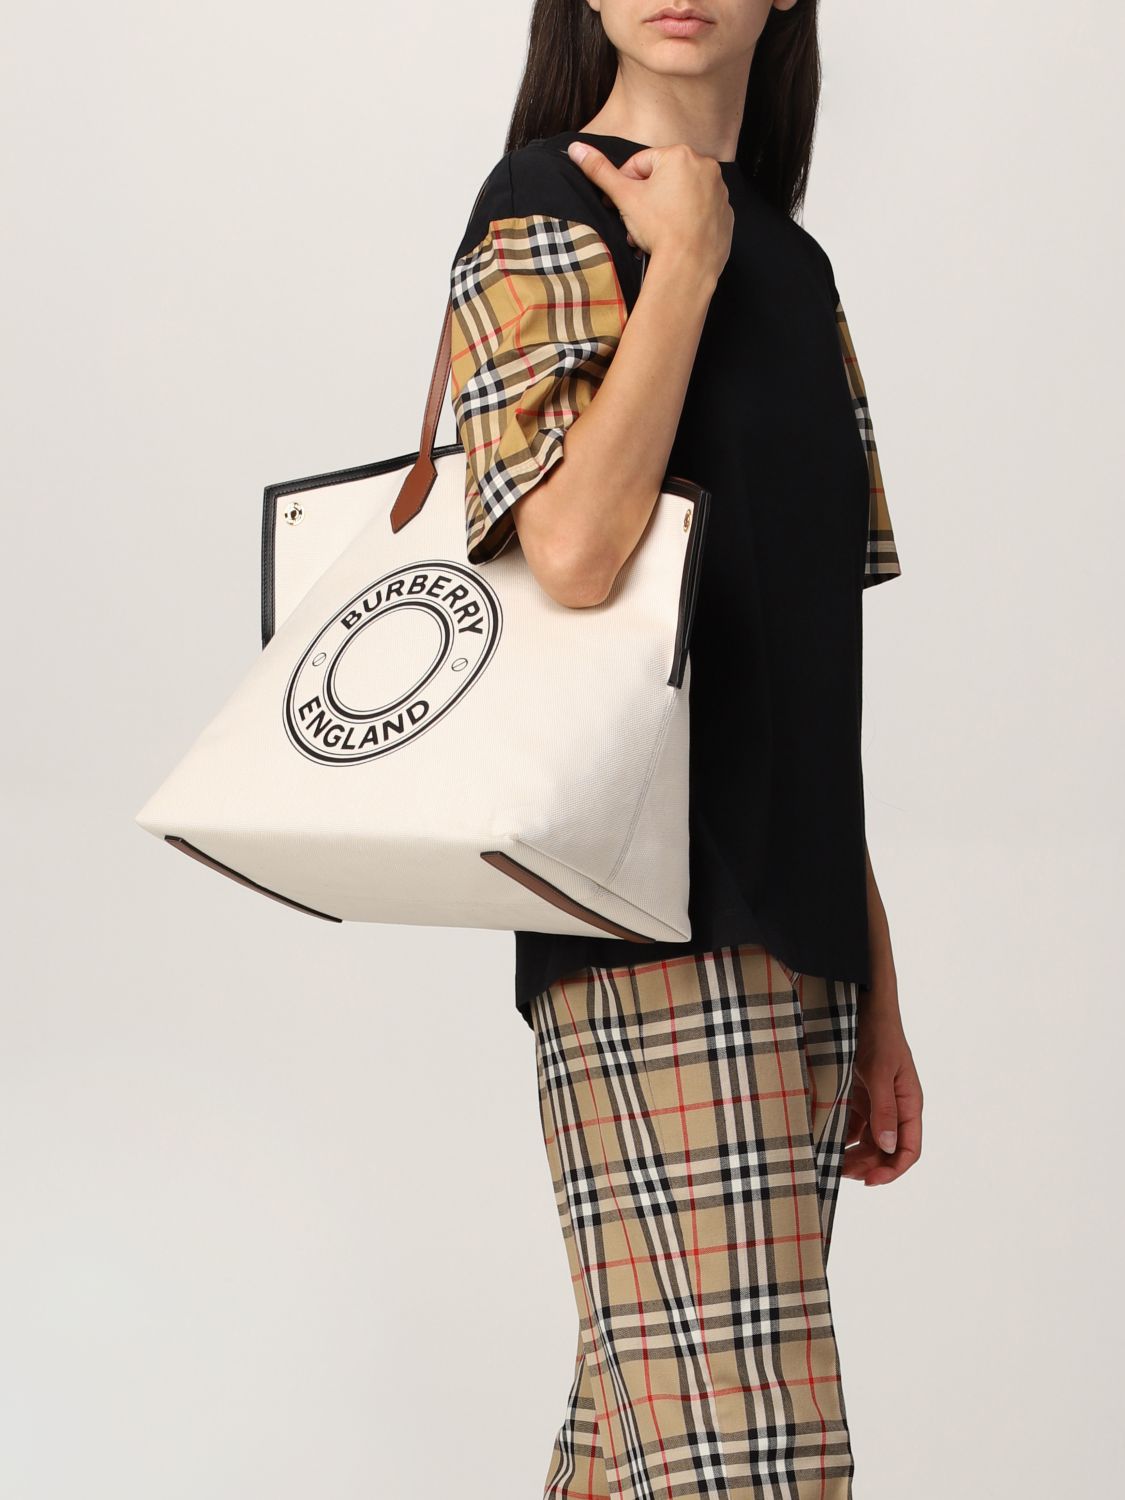 graphic logo Society tote bag, Burberry